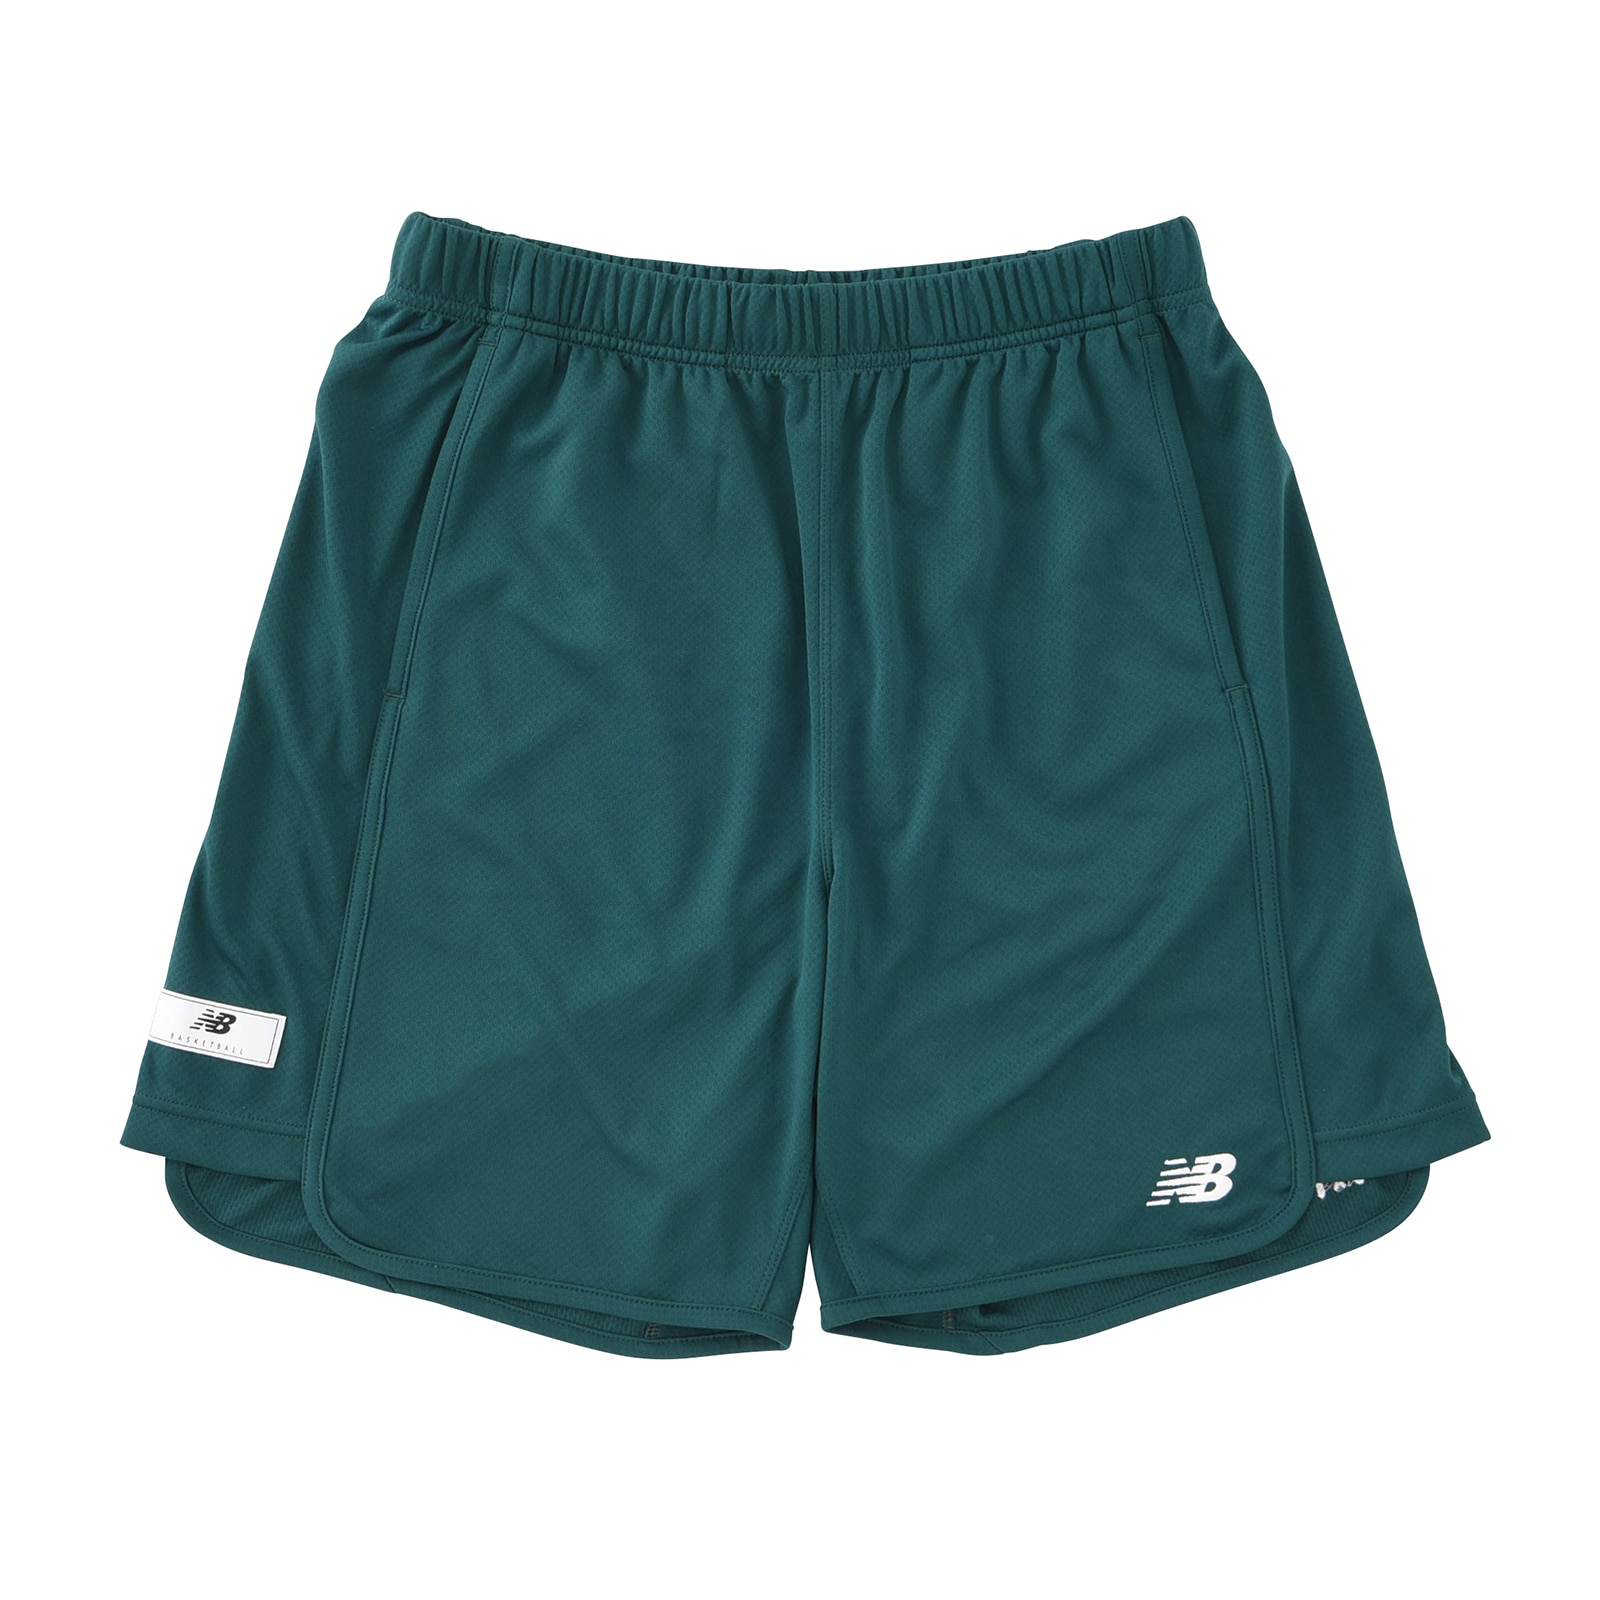 Dimpled mesh side panel shorts